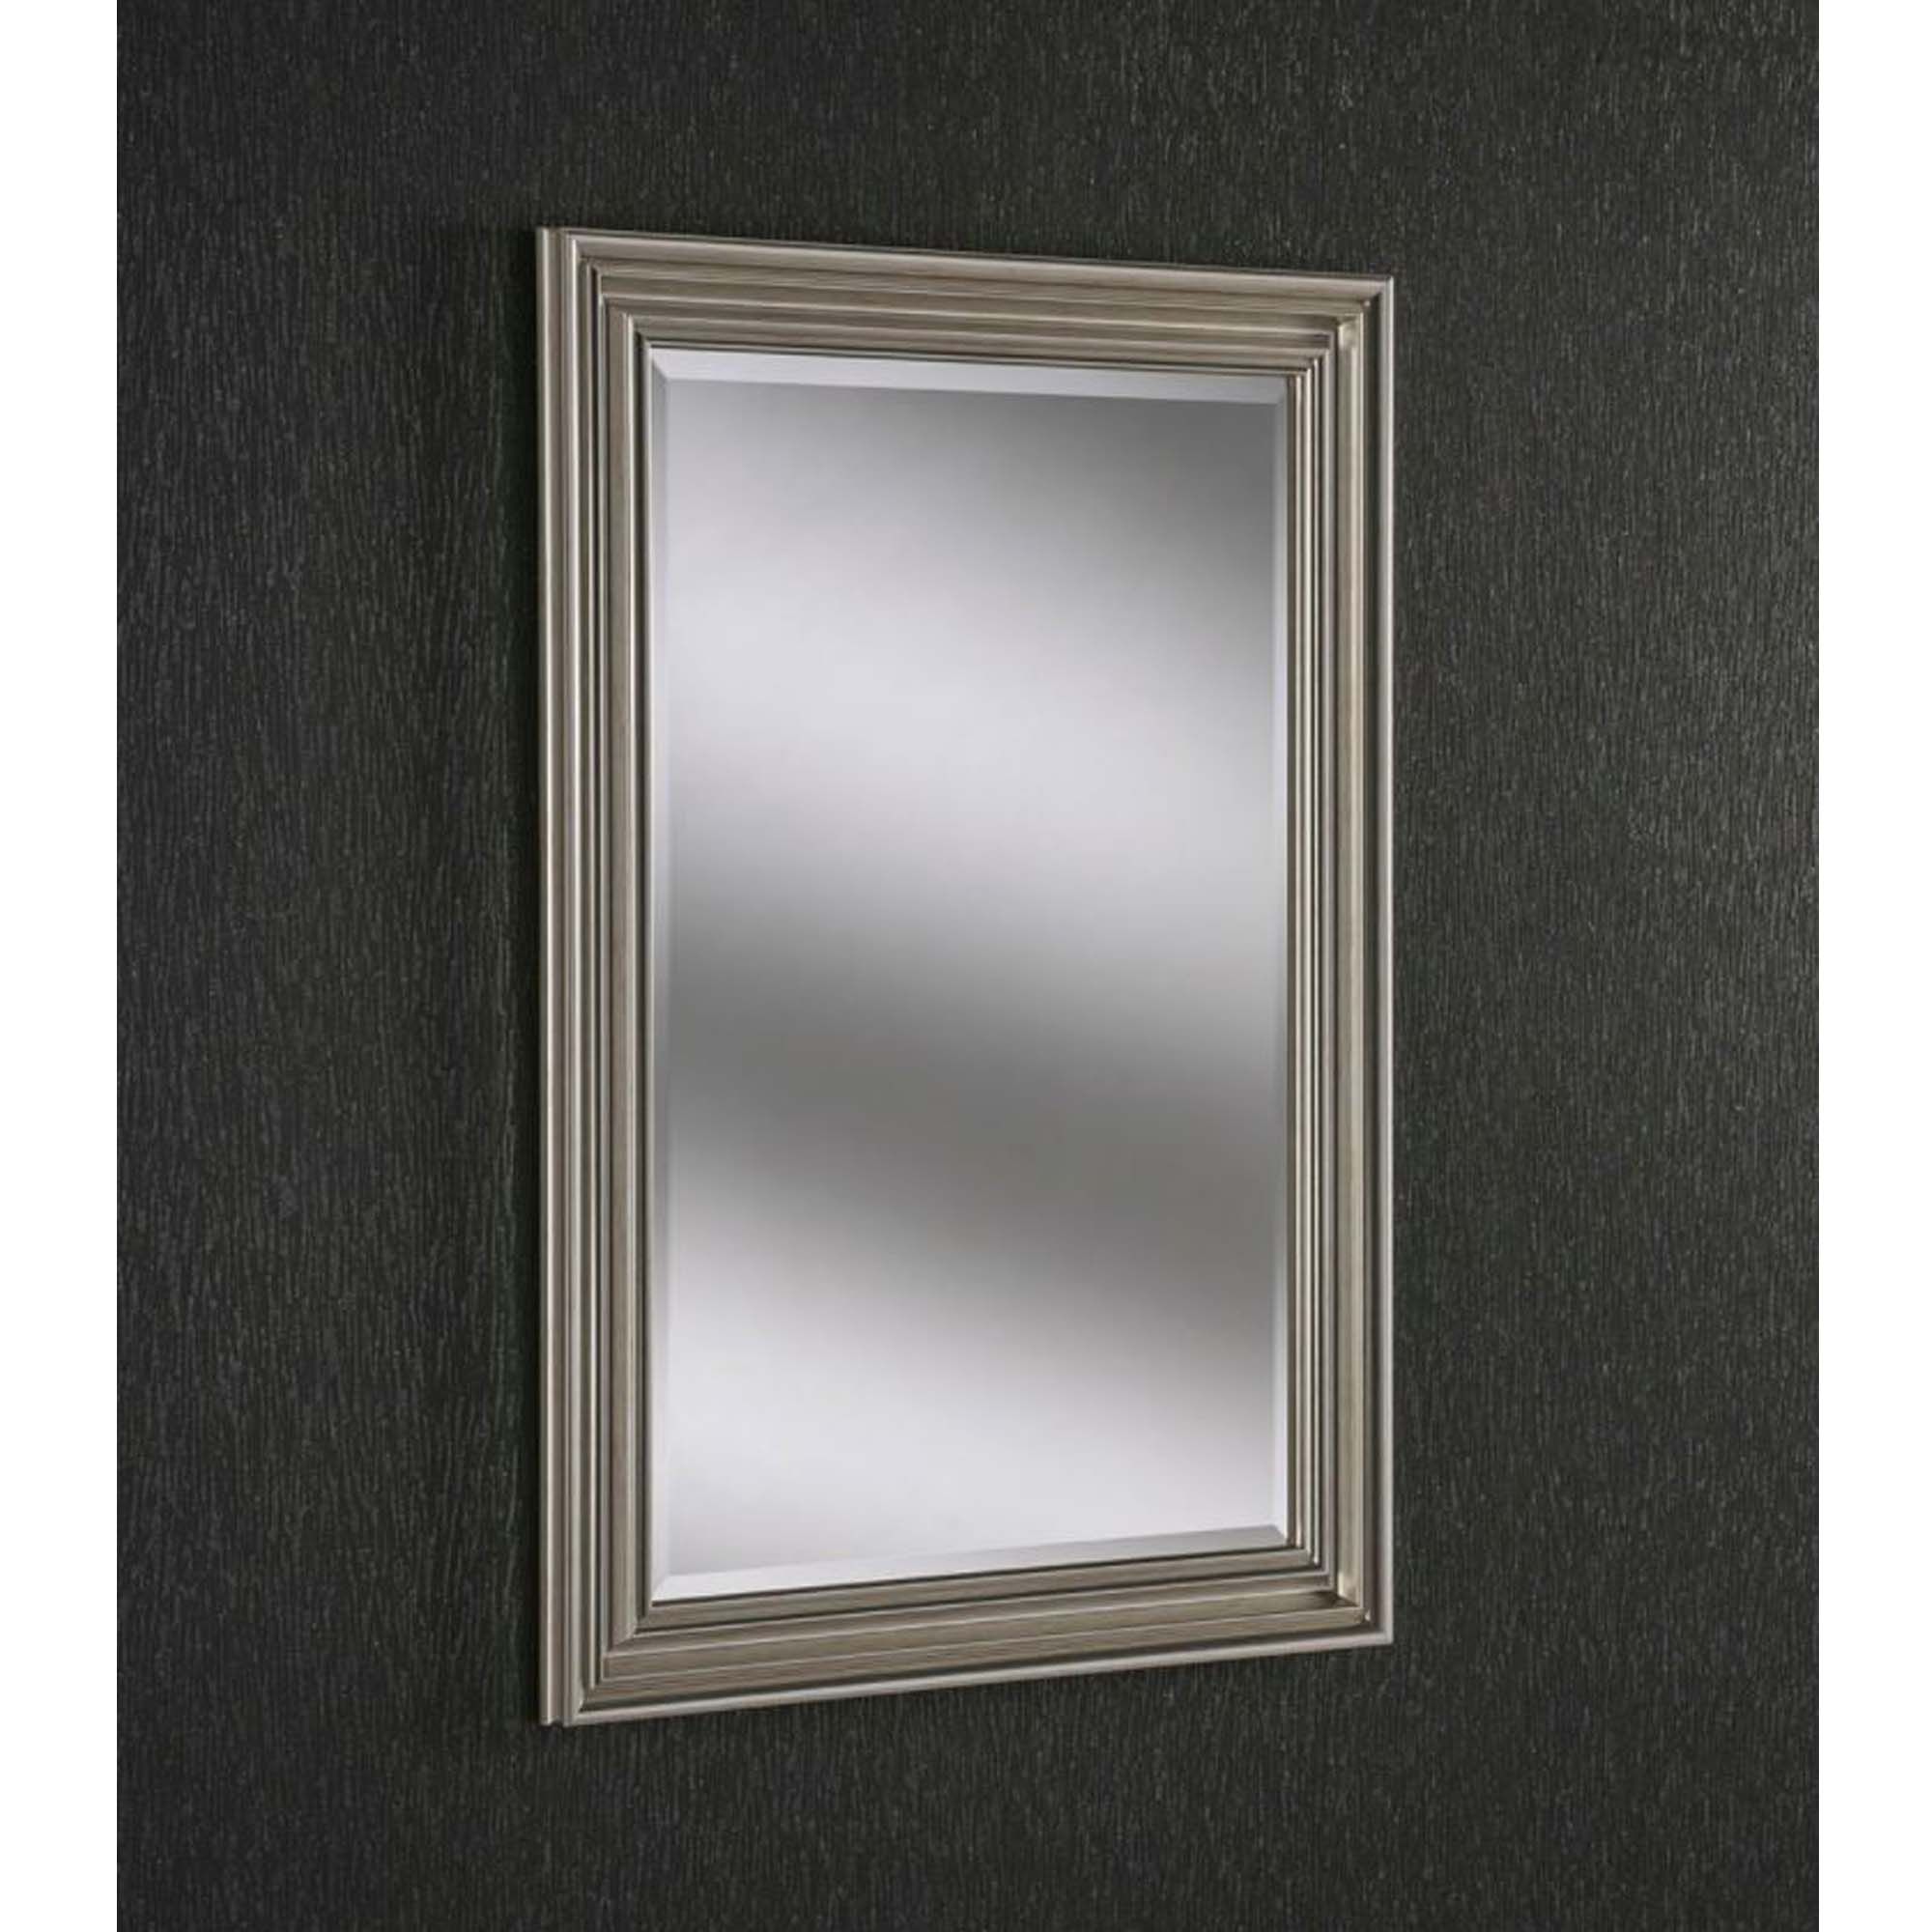 Multi Bevel Silver Wall Mirror | Decor | Homesdirect365 Within Silver High Wall Mirrors (View 5 of 15)